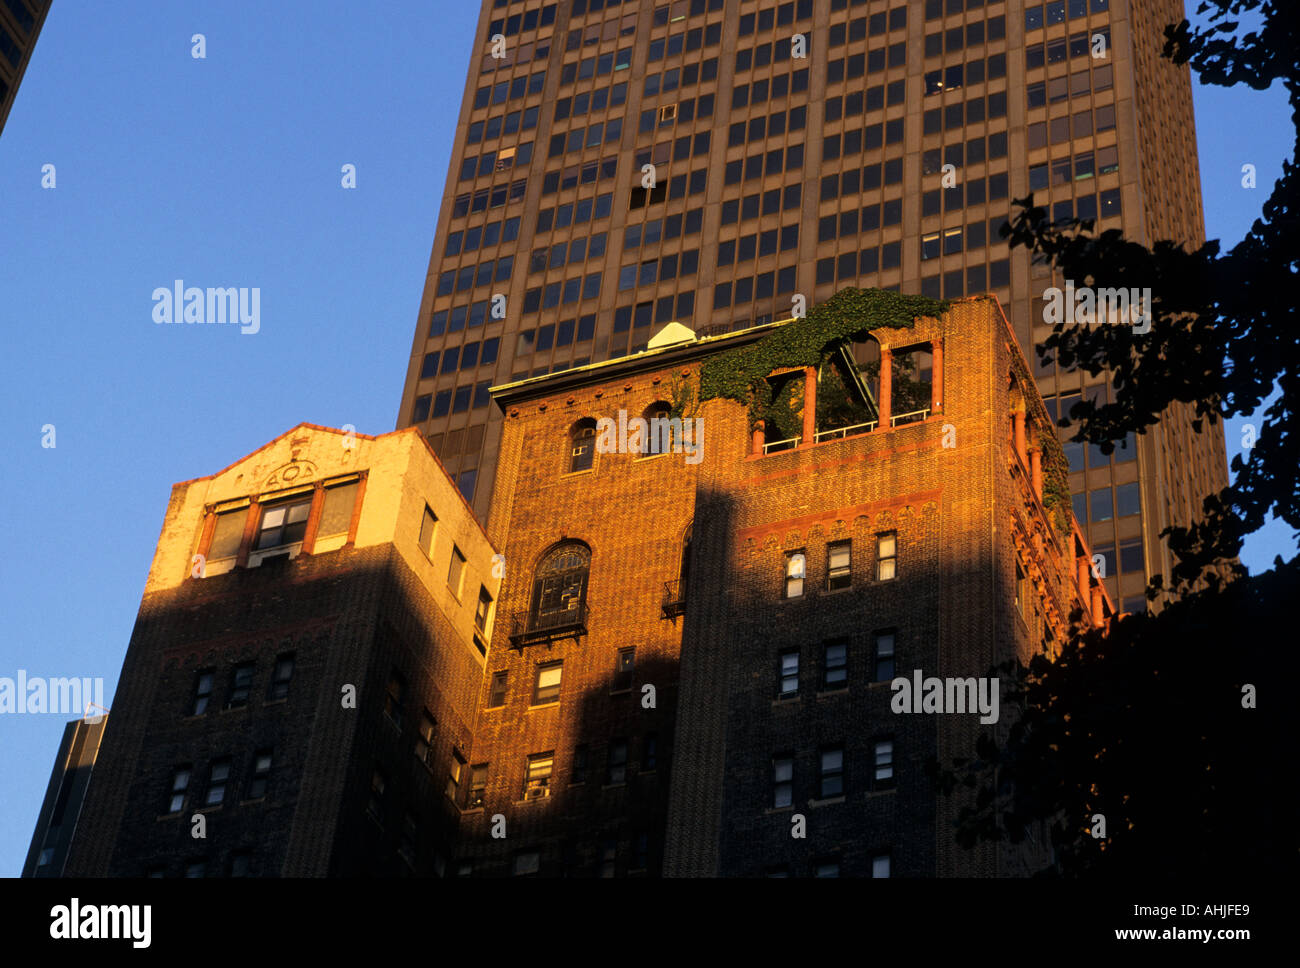 Red brick building with green creeper growing over top section in golden, late evening sunlight. New York, New York, USA. Stock Photo